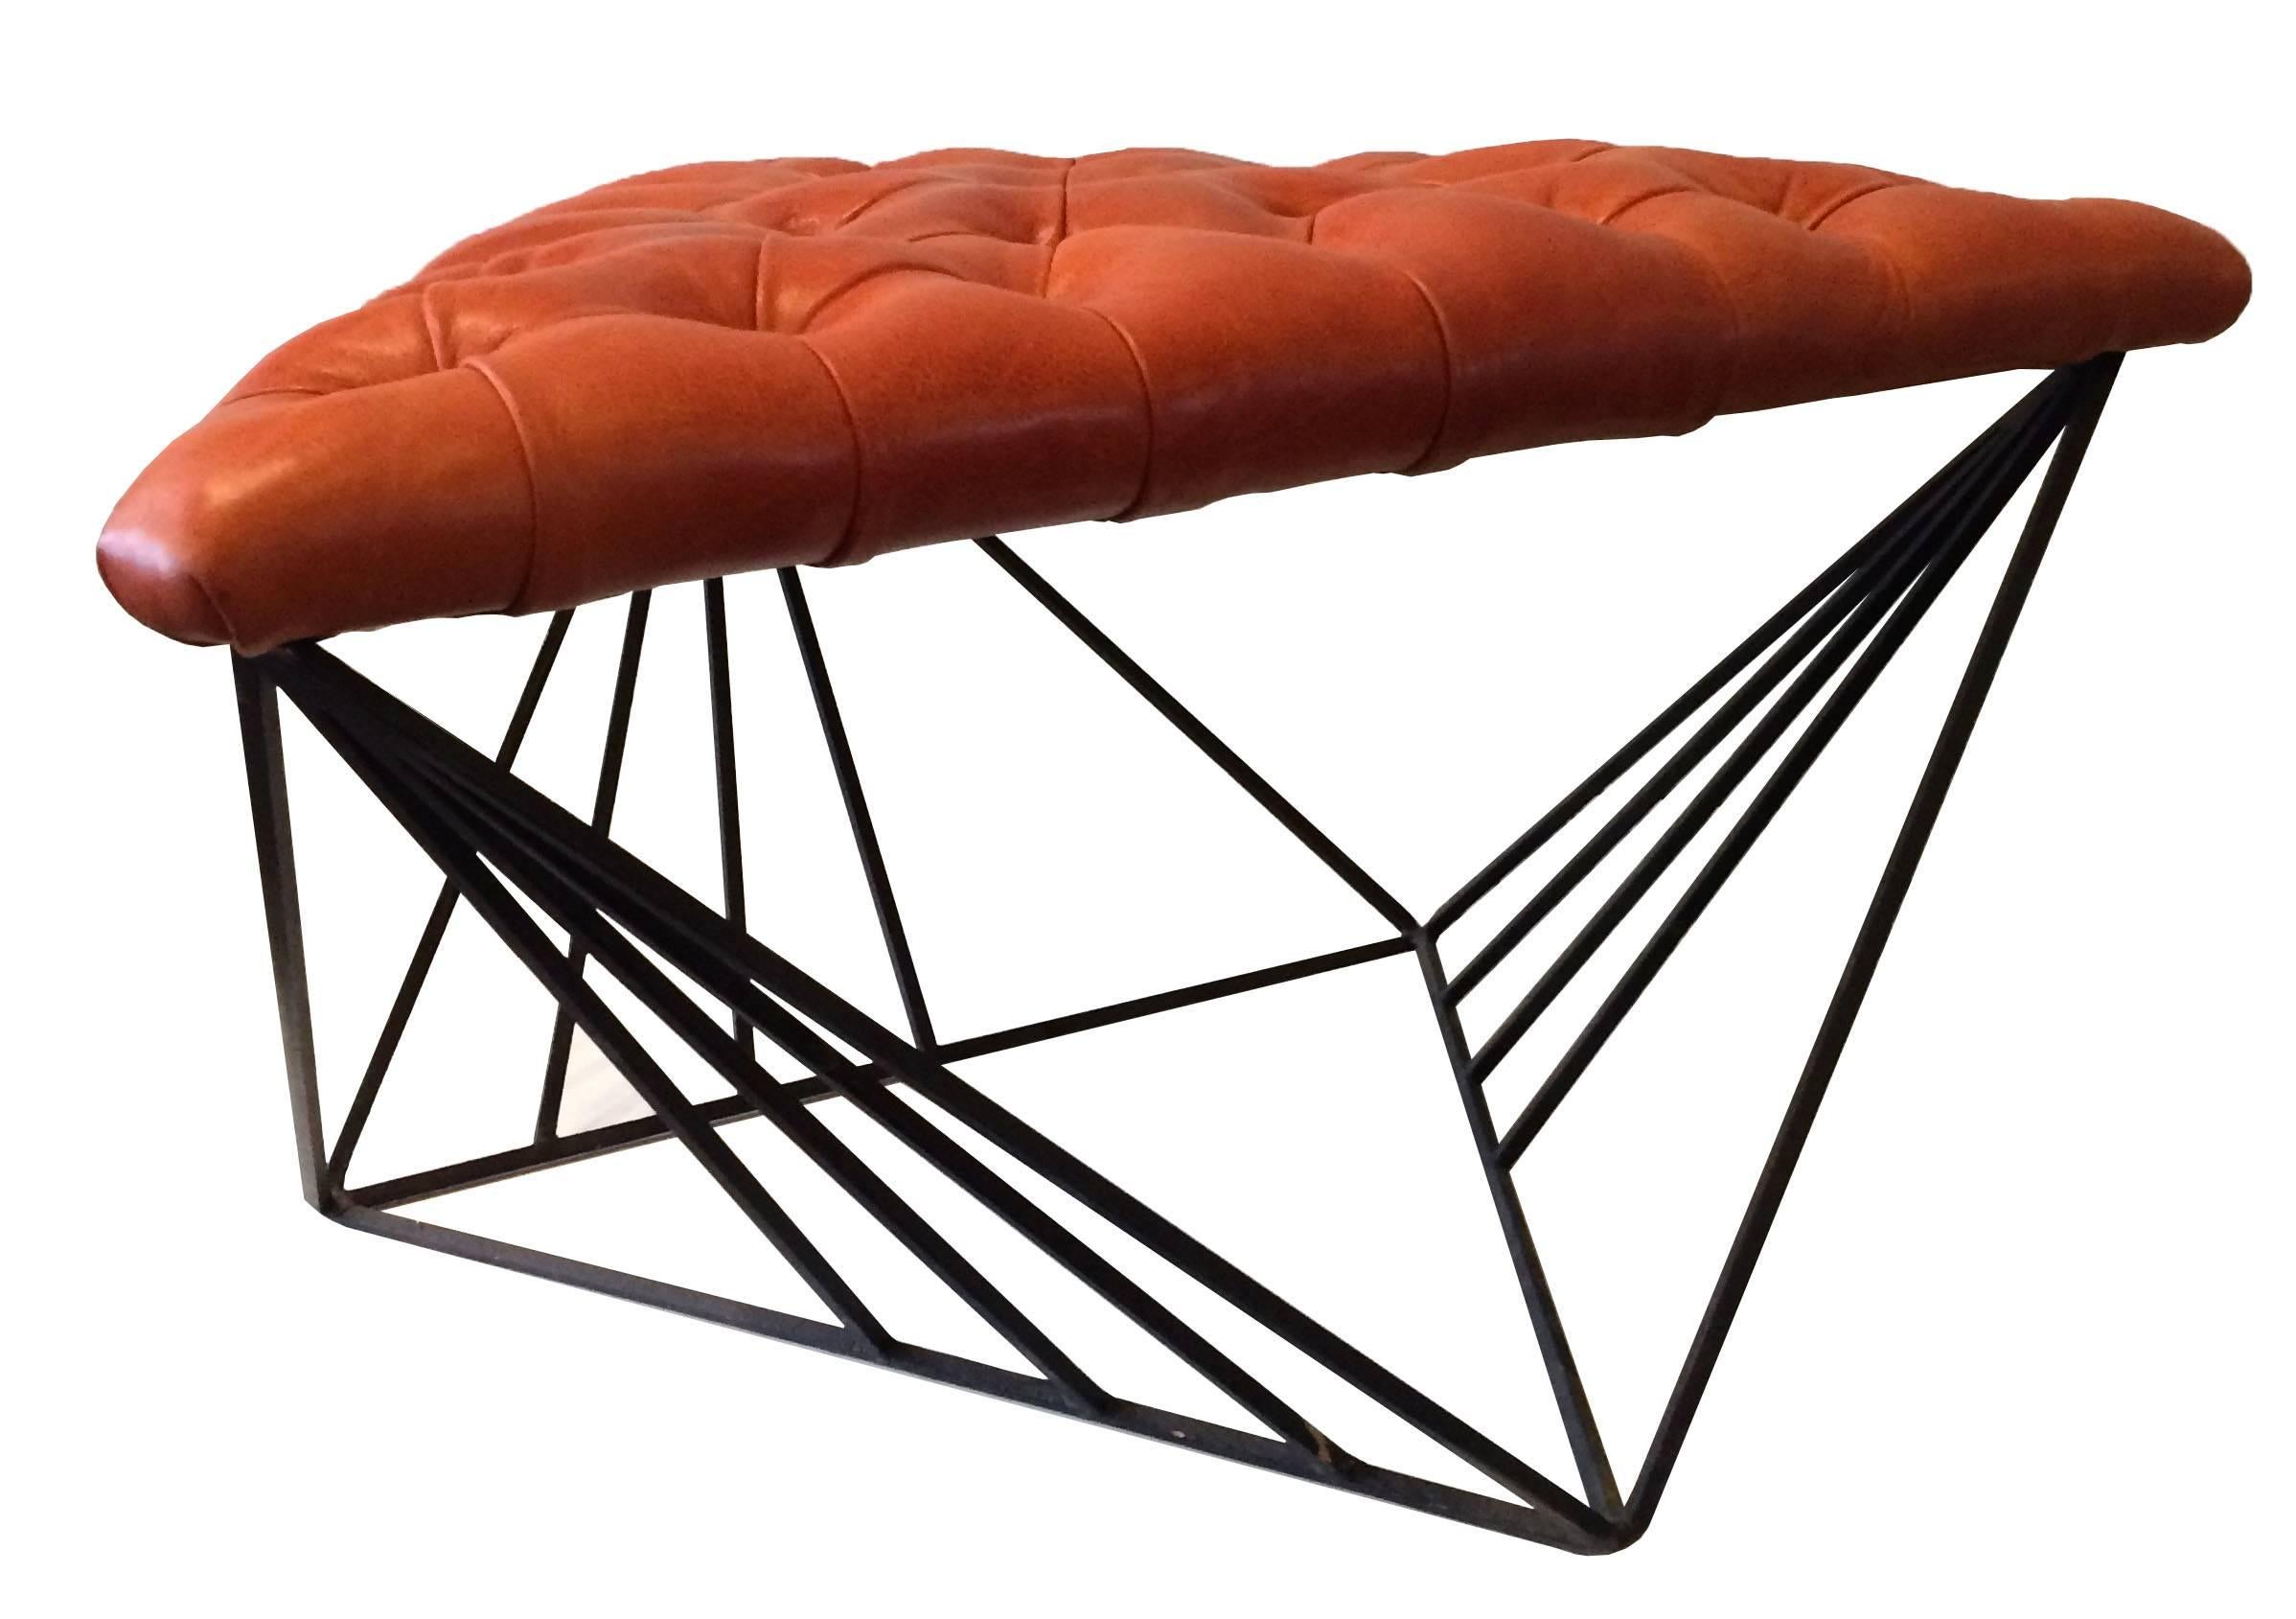 Modernist ottoman with striking, geometric, wrought iron base with newly upholstered, triangular, tufted leather seat.